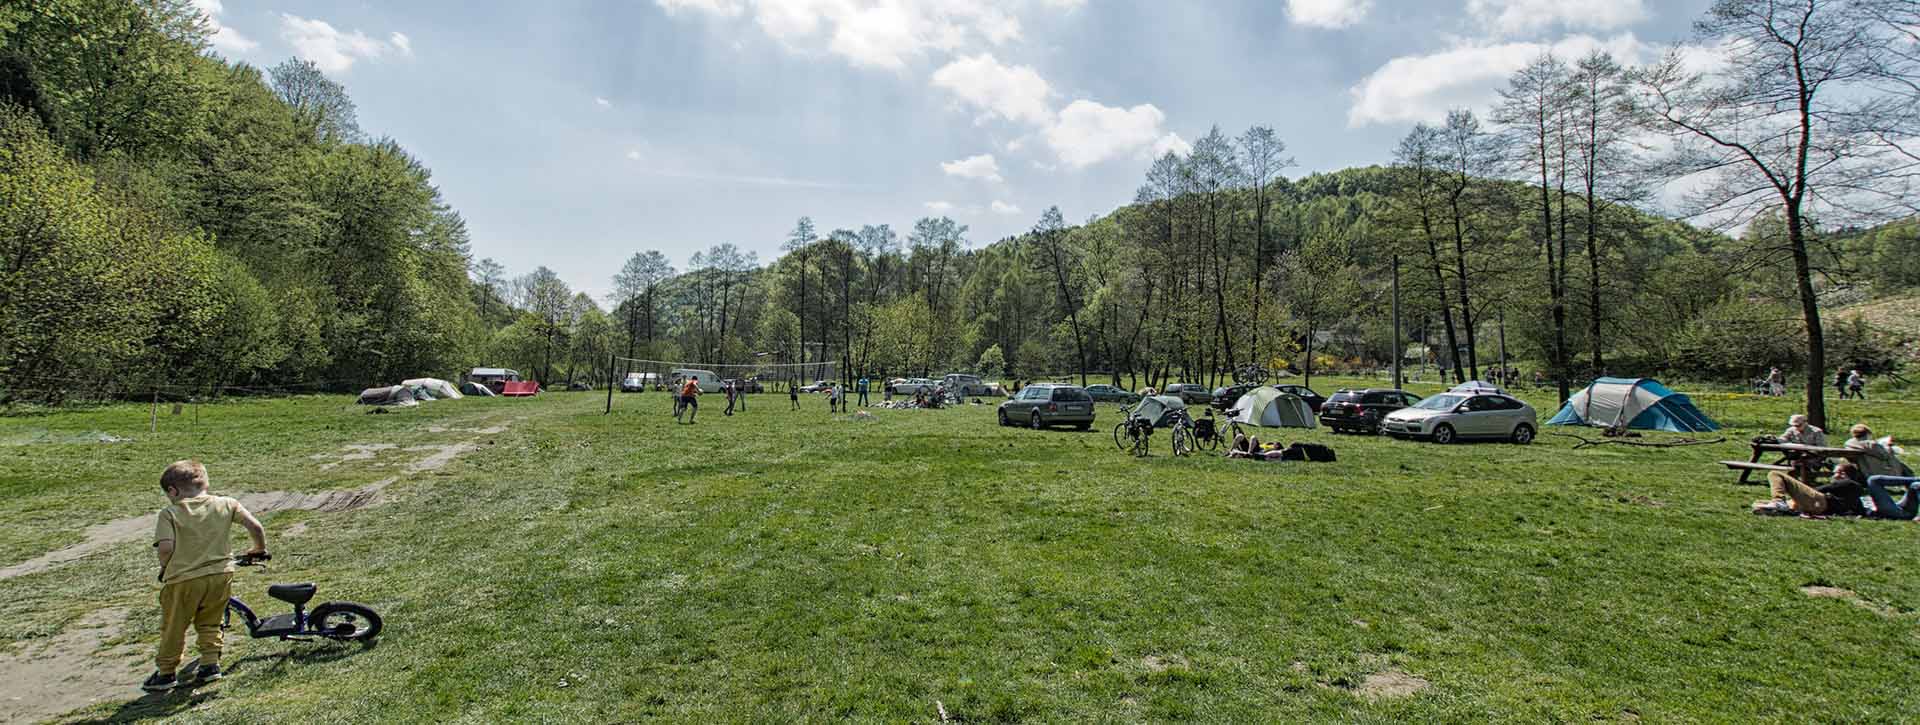 Campground in the Będkowska valley. Campfire, party, corporate event.